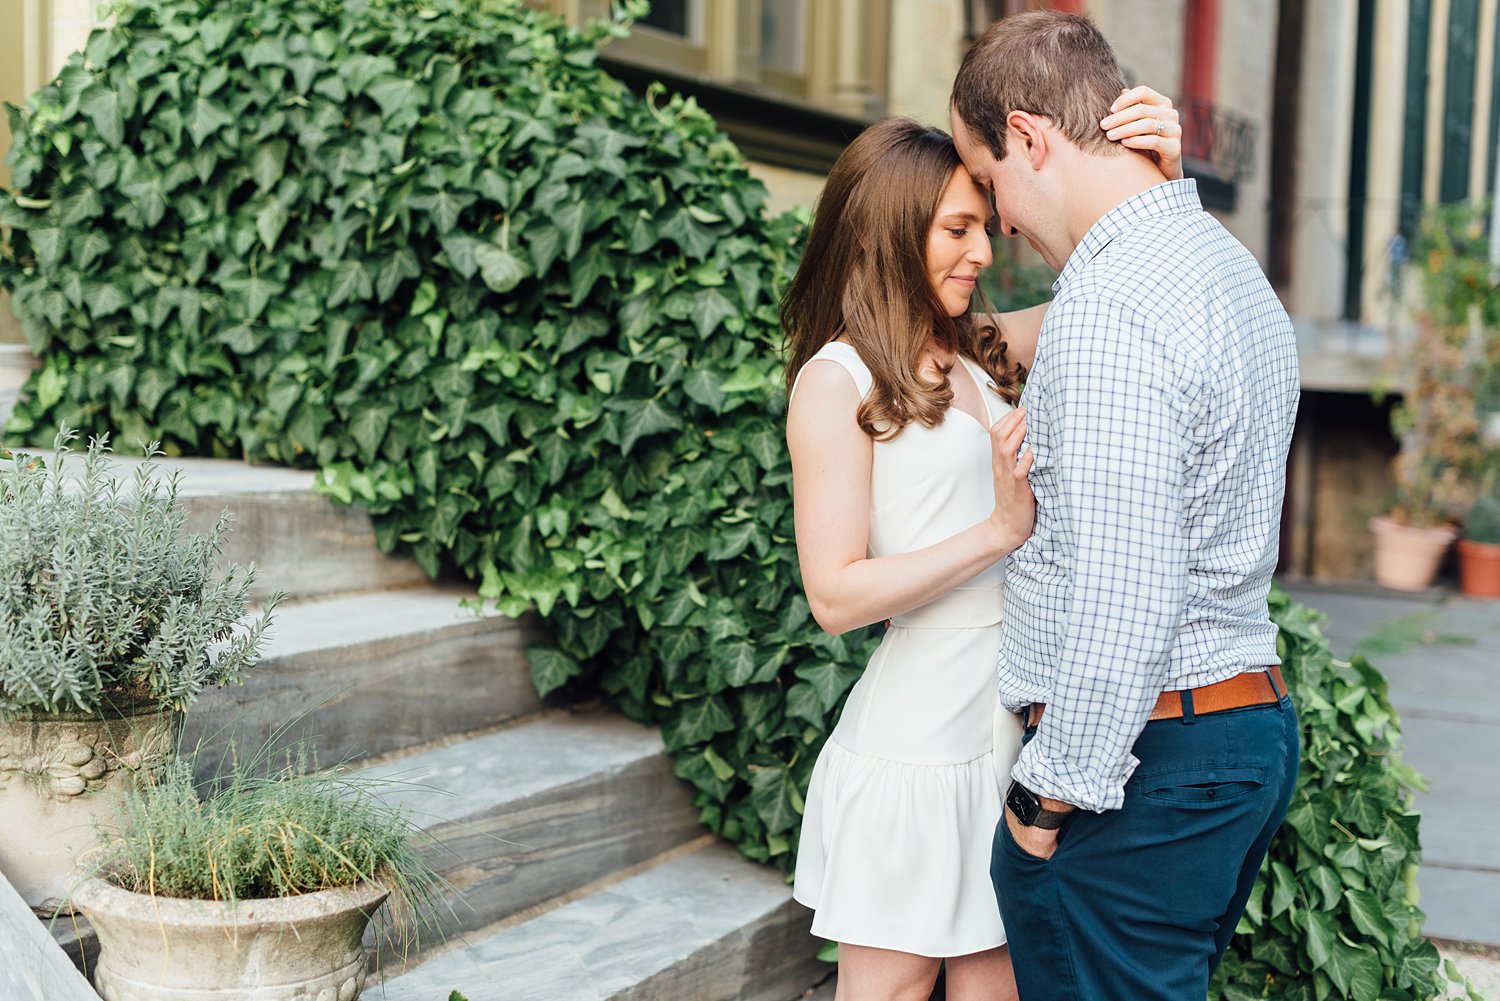 Hallie + Andrew - Fitler Square Engagement Session - Maryland Engagement Photographer - Alison Dunn Photography photo